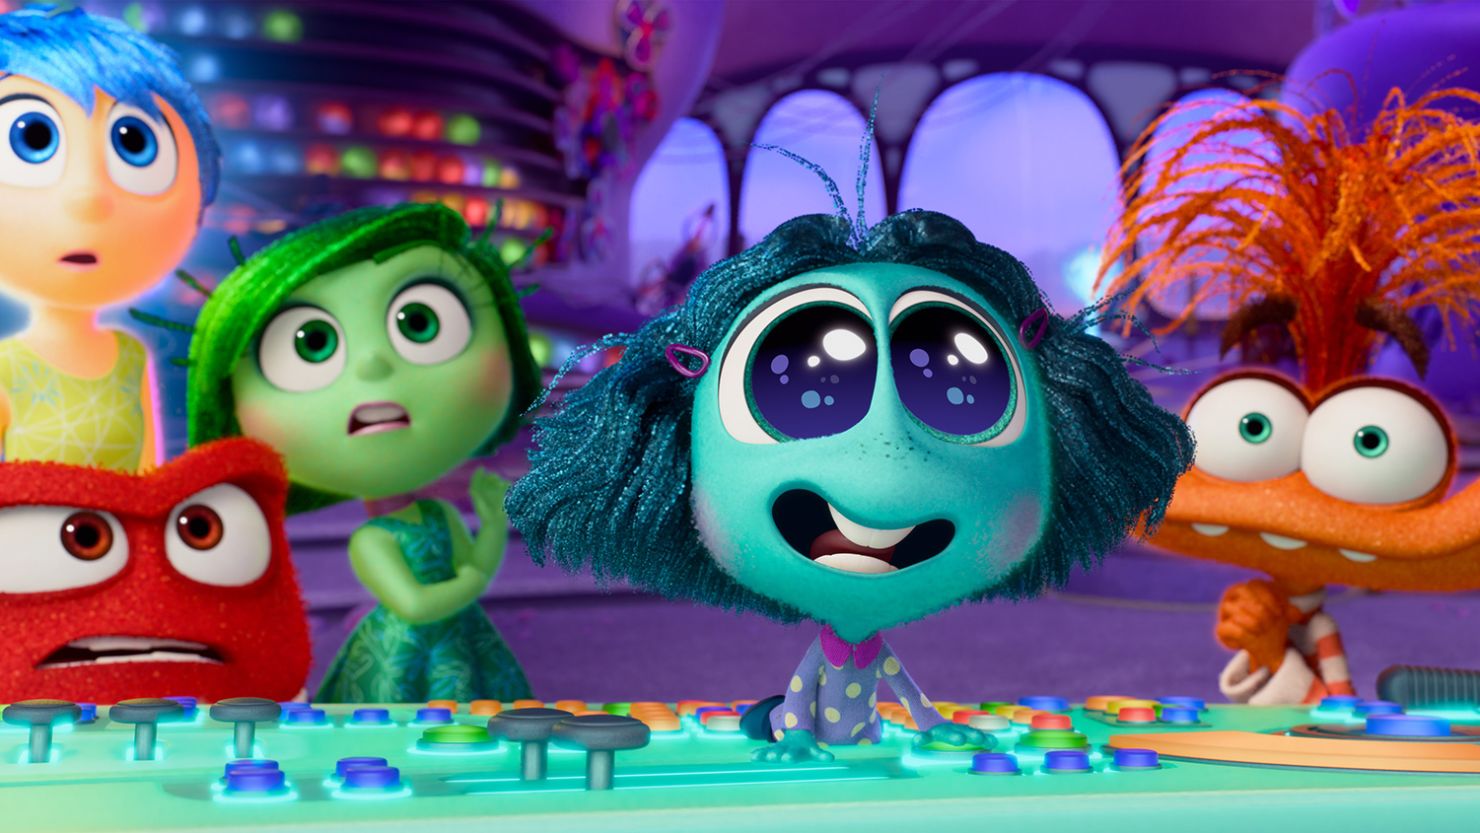 The new Pixar film "Inside Out 2" gives voice to the emotions racing through the mind of 13-year-old Riley, including the character of Envy (center).